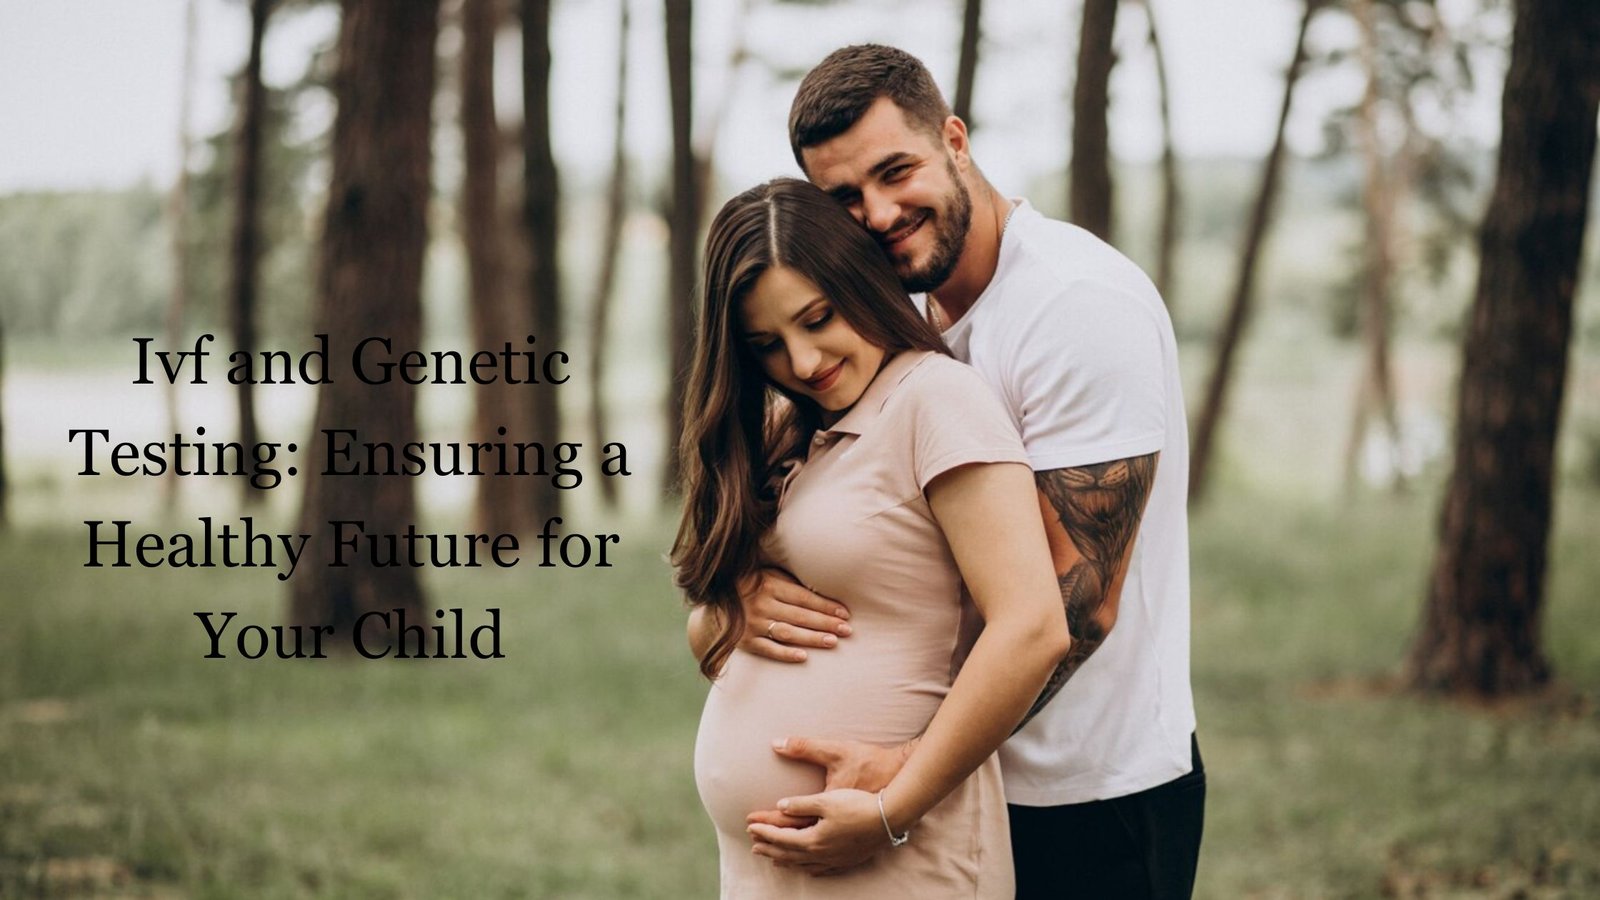 Ivf and Genetic Testing: Ensuring a Healthy Future for Your Child